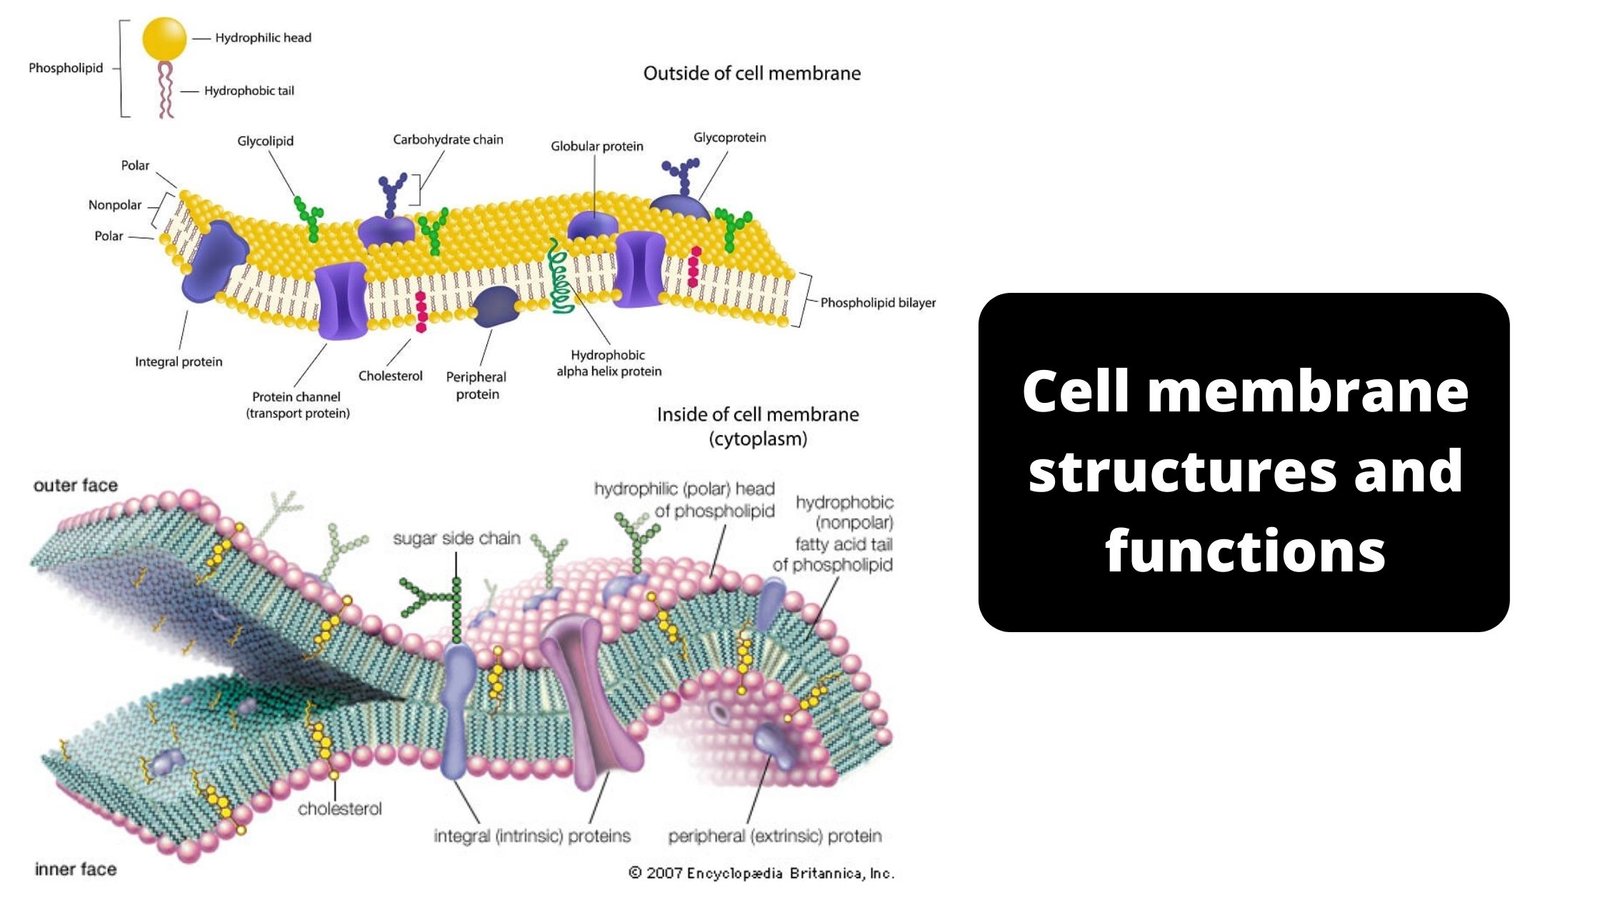 Cell membrane (Plasma Membrane) Structures and Functions